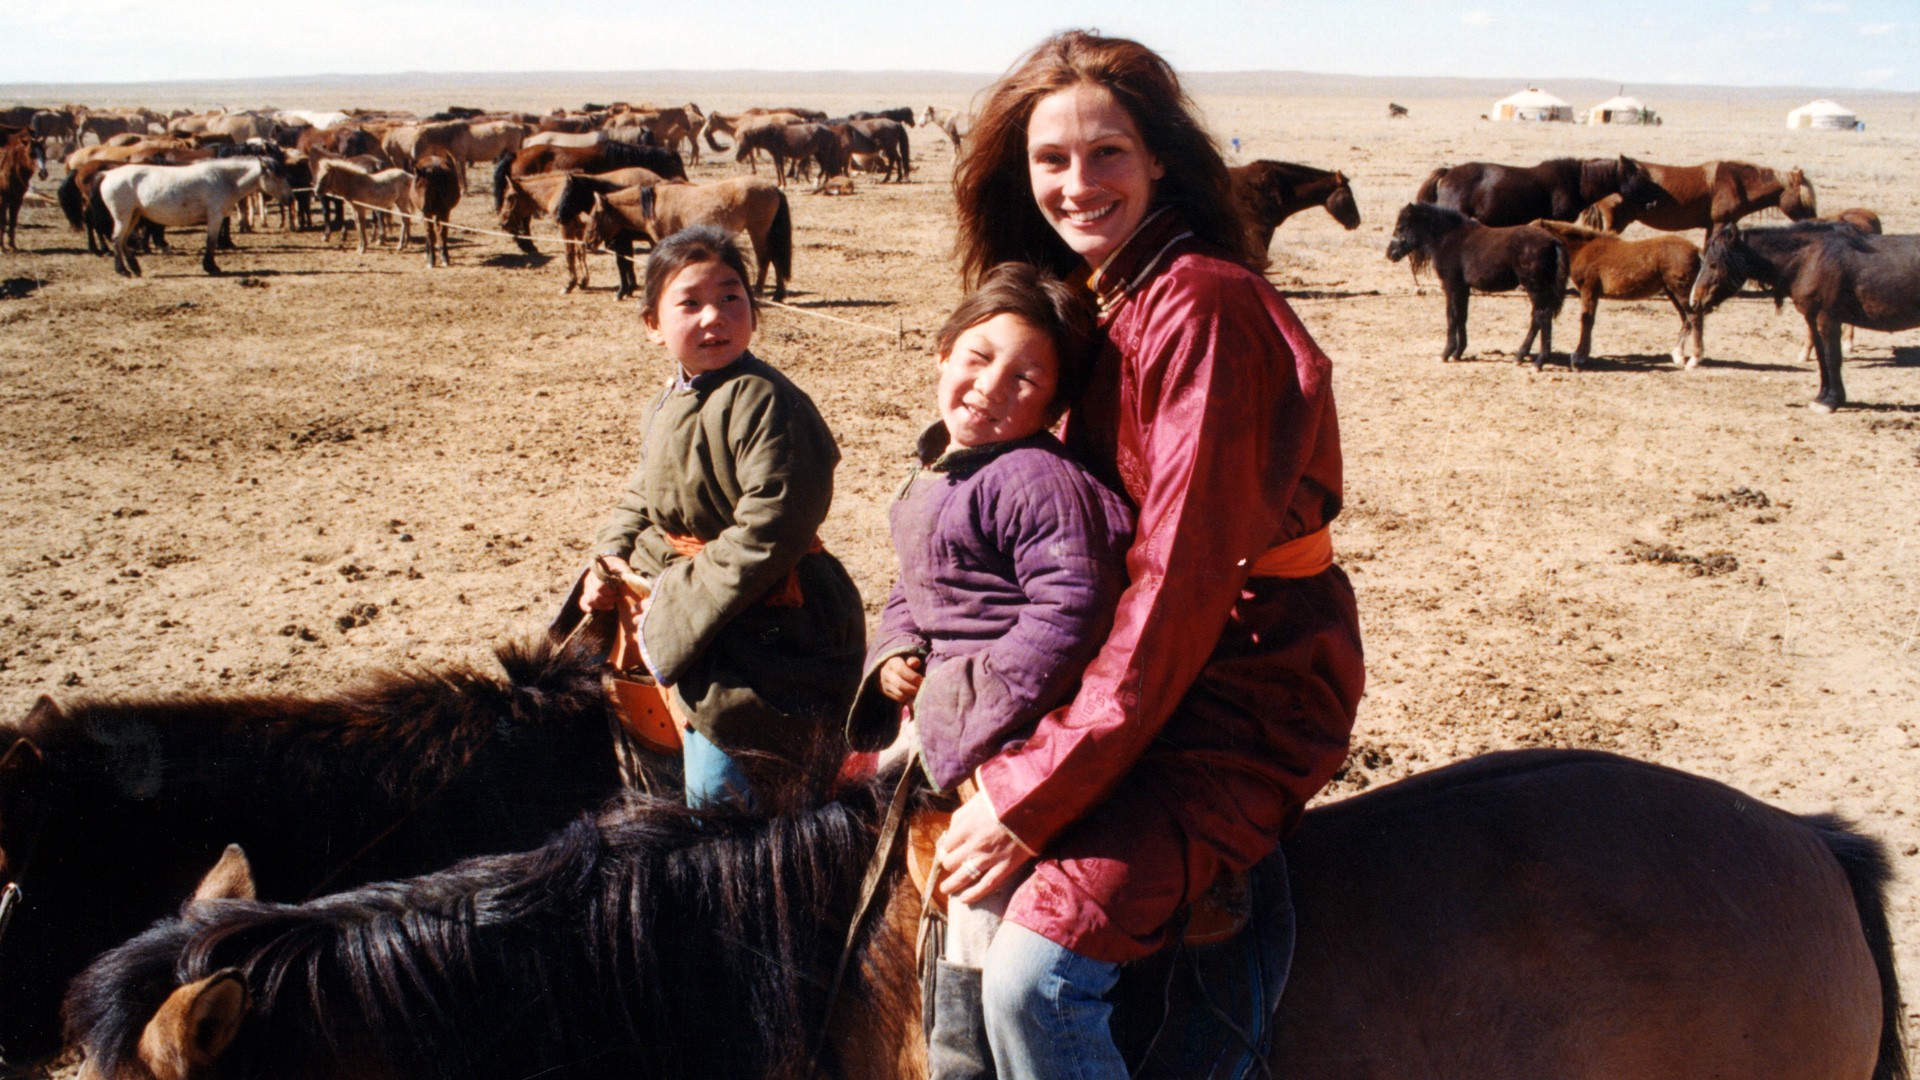 Internationally acclaimed superstar actress Julia Roberts visited Mongolia in 1999